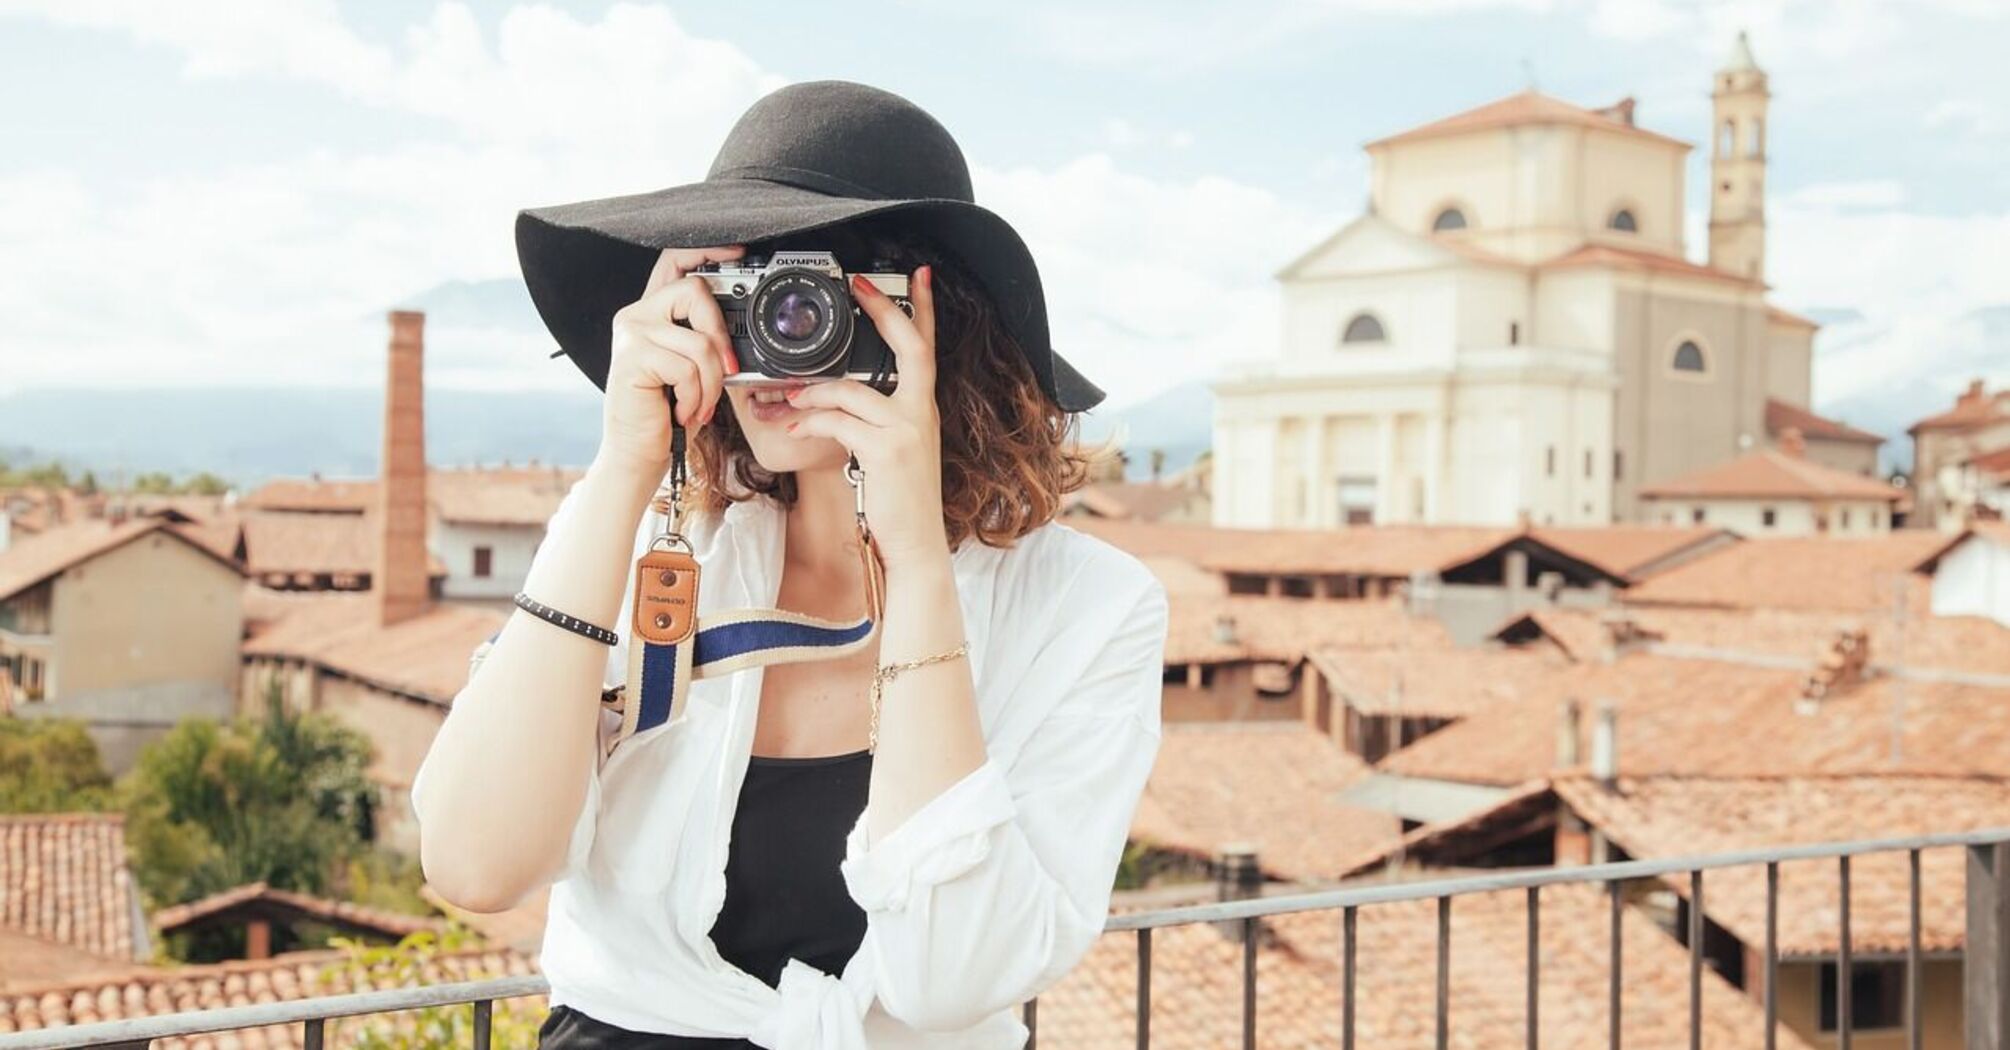 Top tips for your first solo trip: from romantic getaways to safety